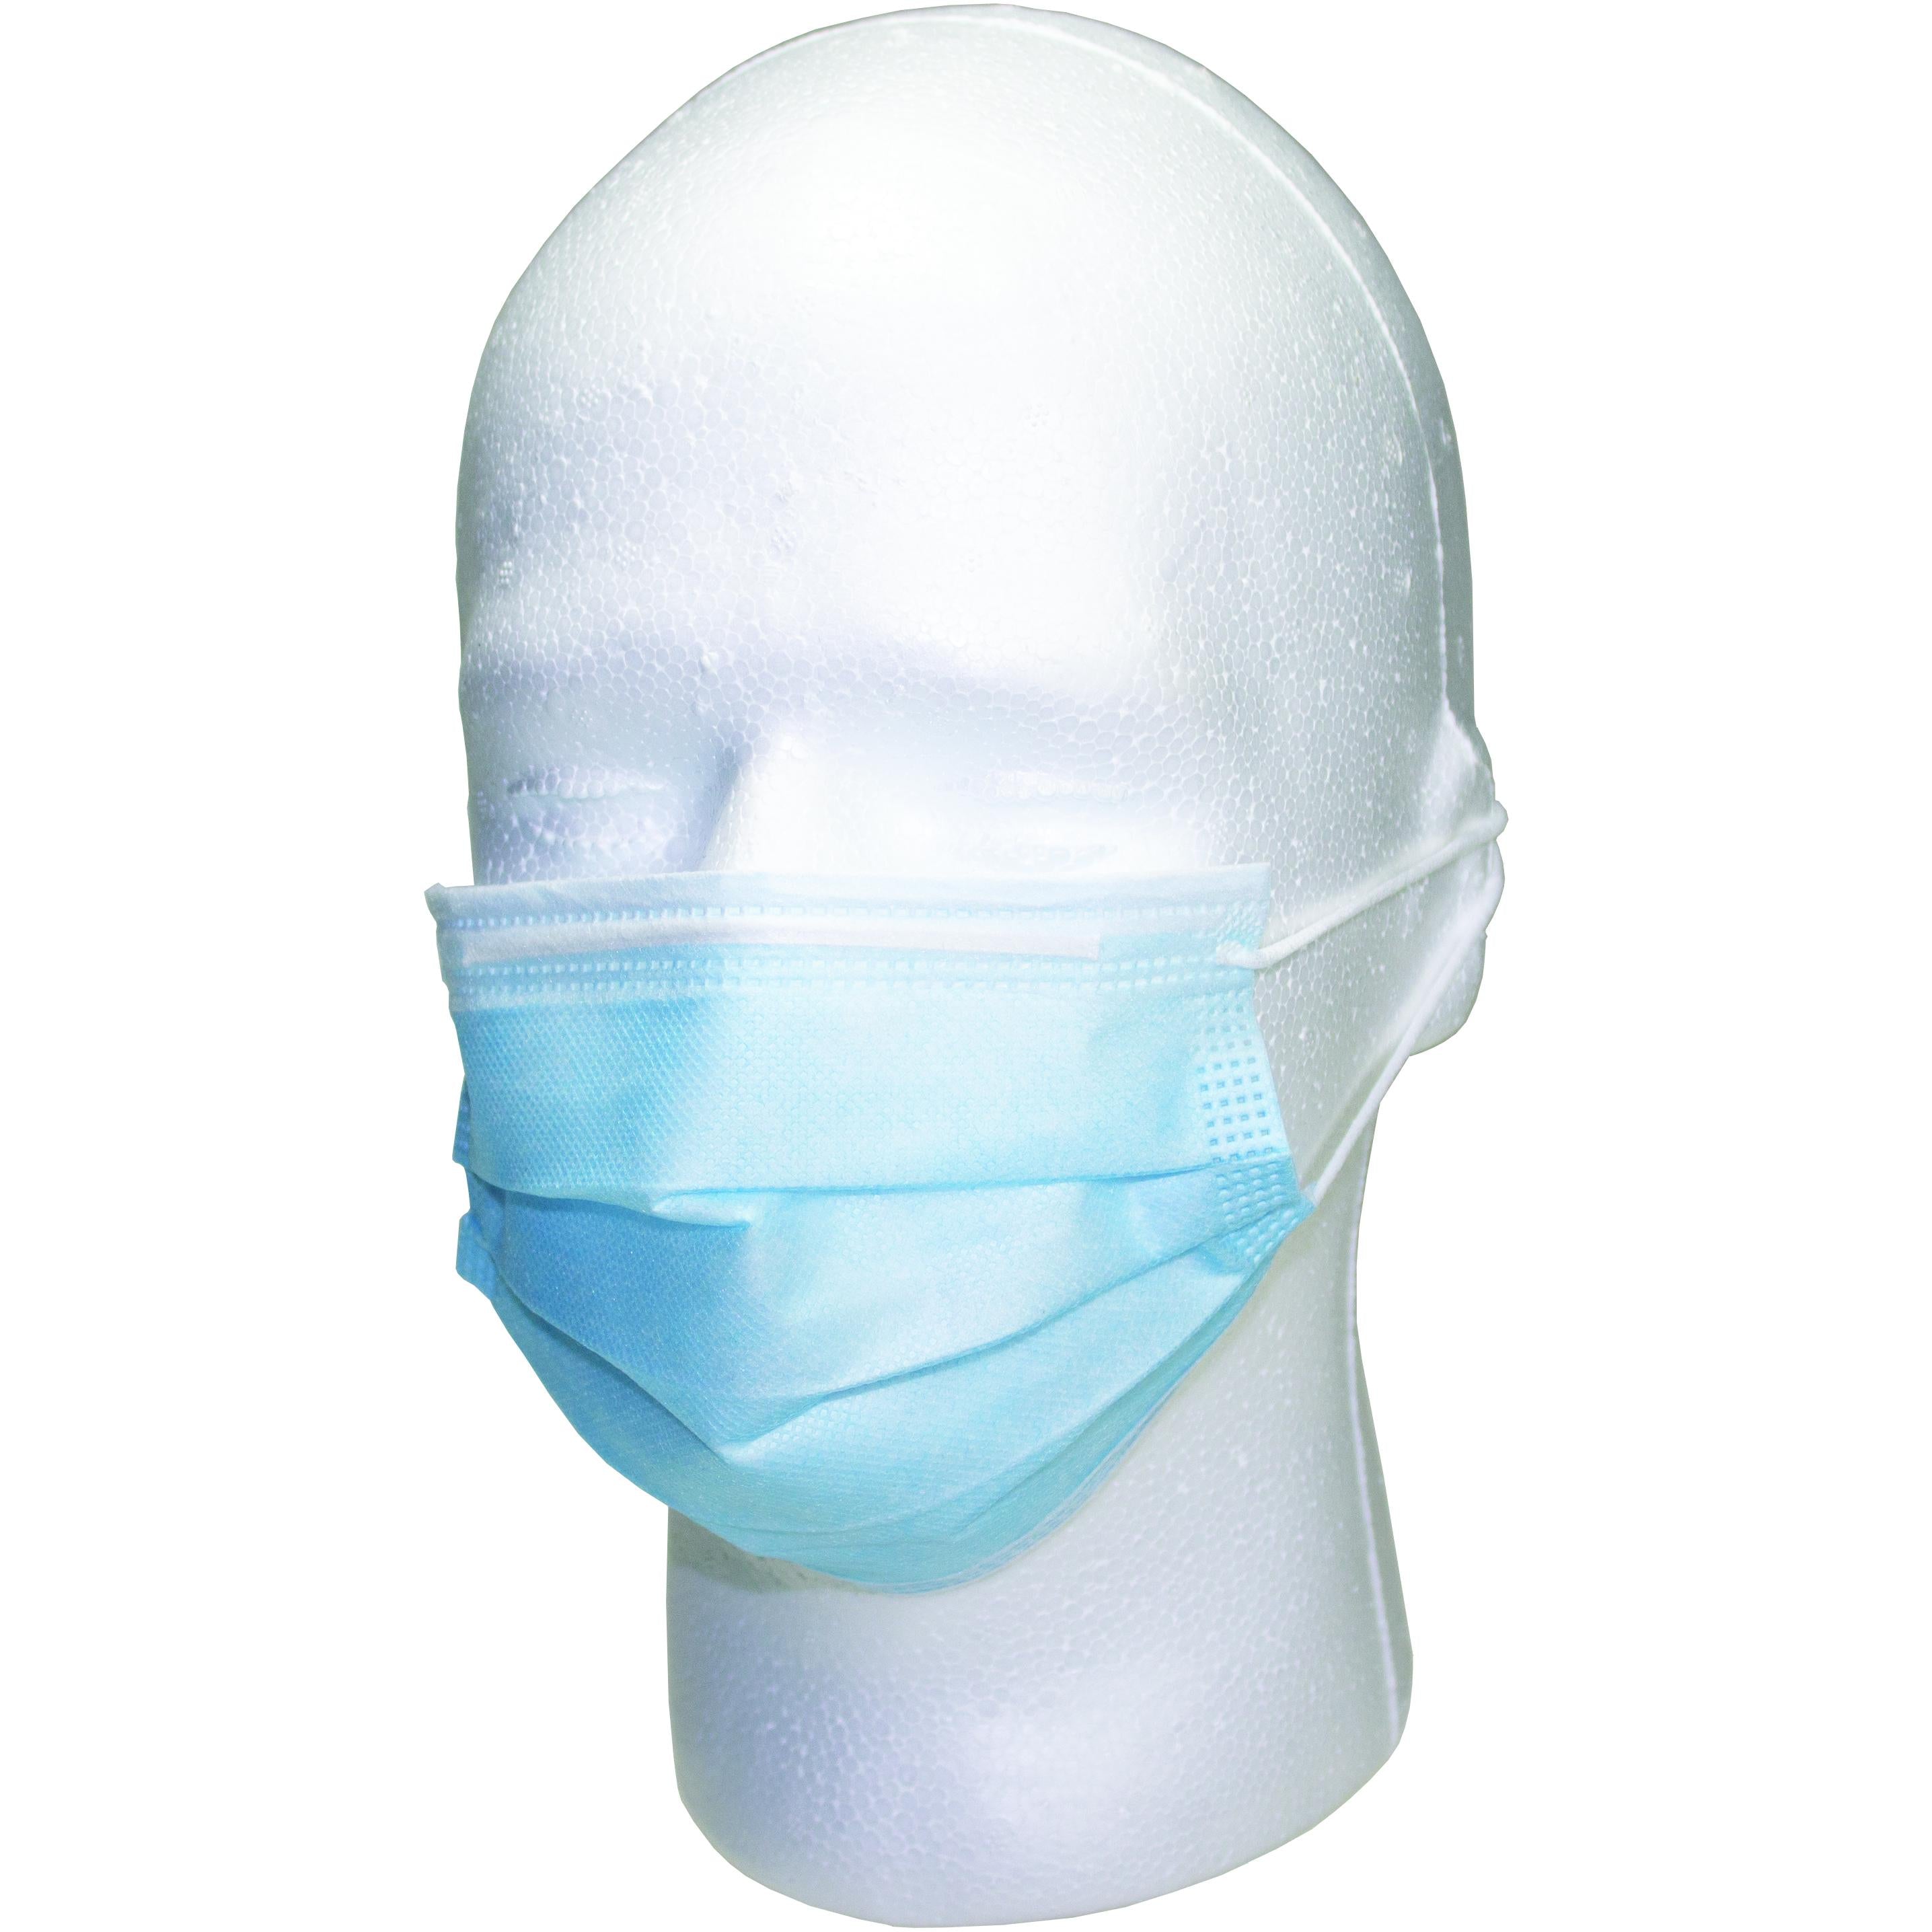 Disposable Face Masks, 3-Ply, Ear Loops